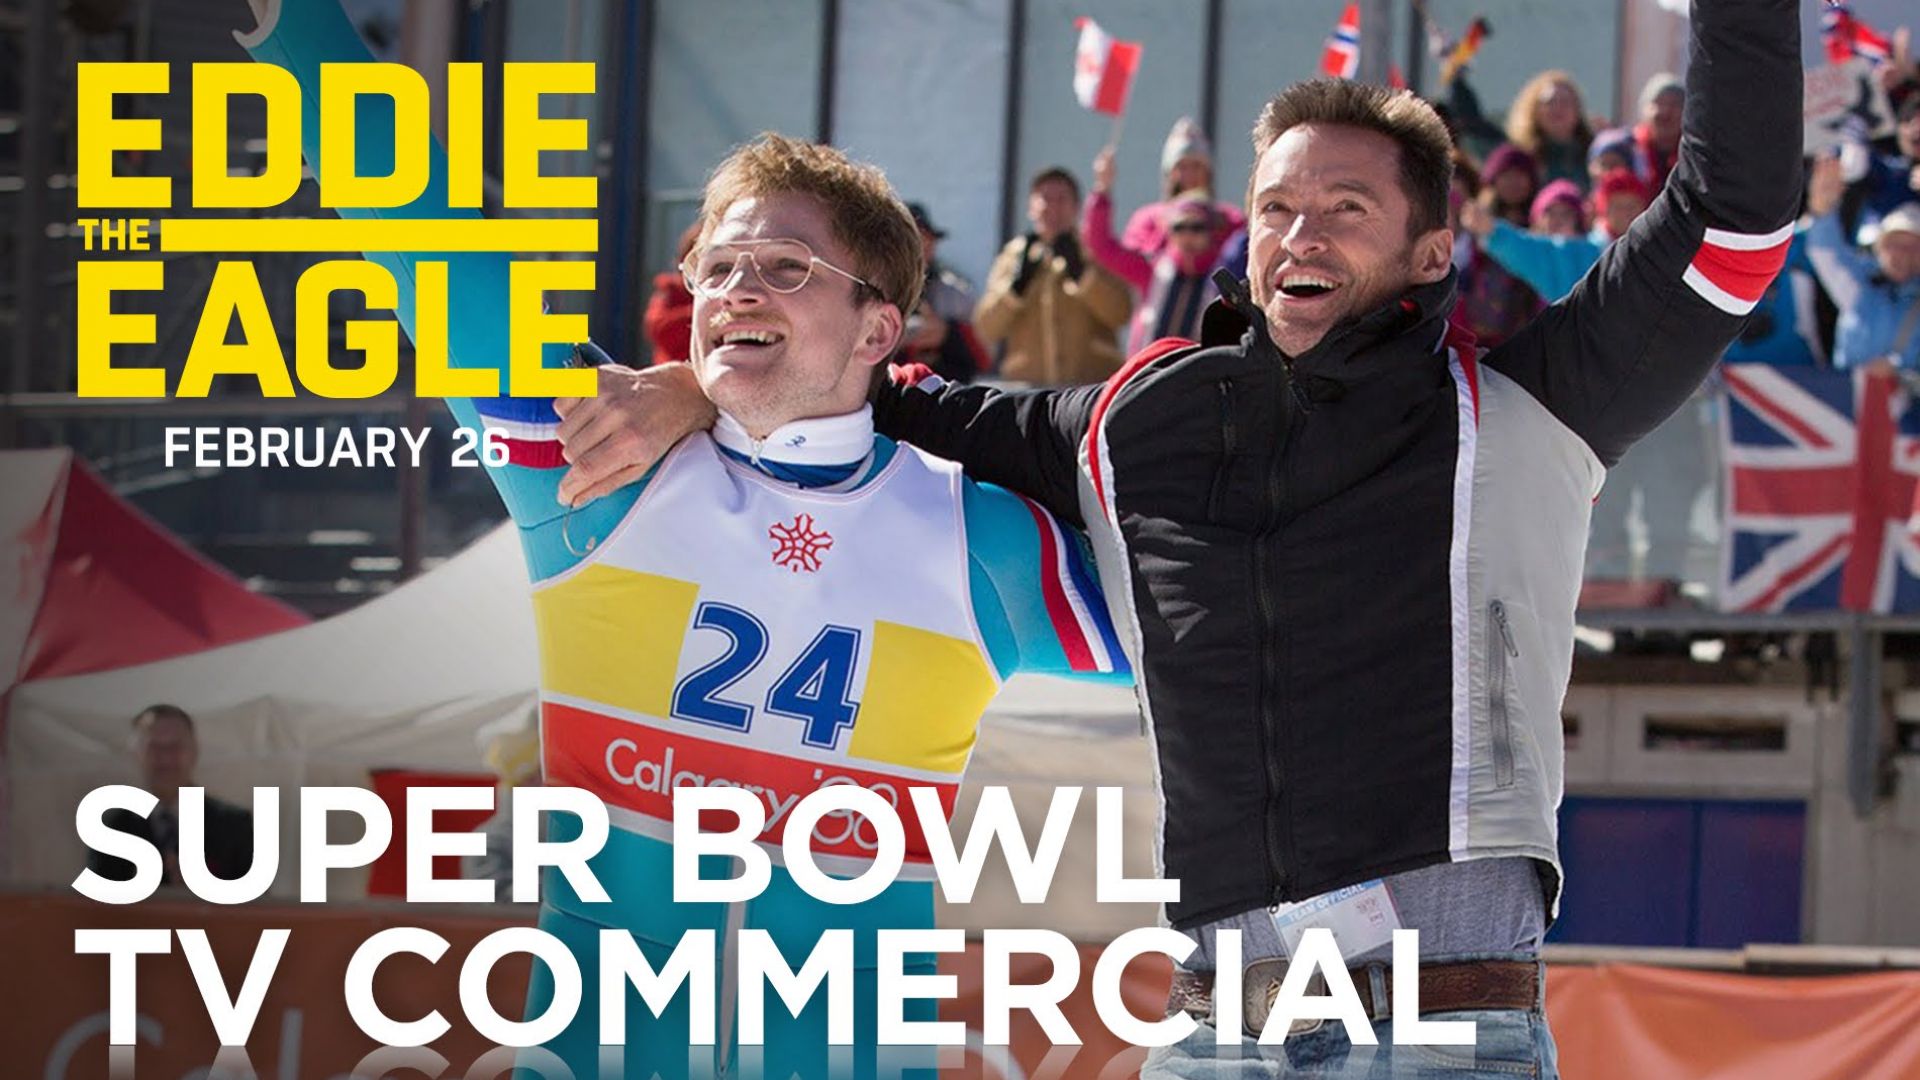 Eddie The Eagle Gets a Super Bowl Spot, Endorsed by Various 